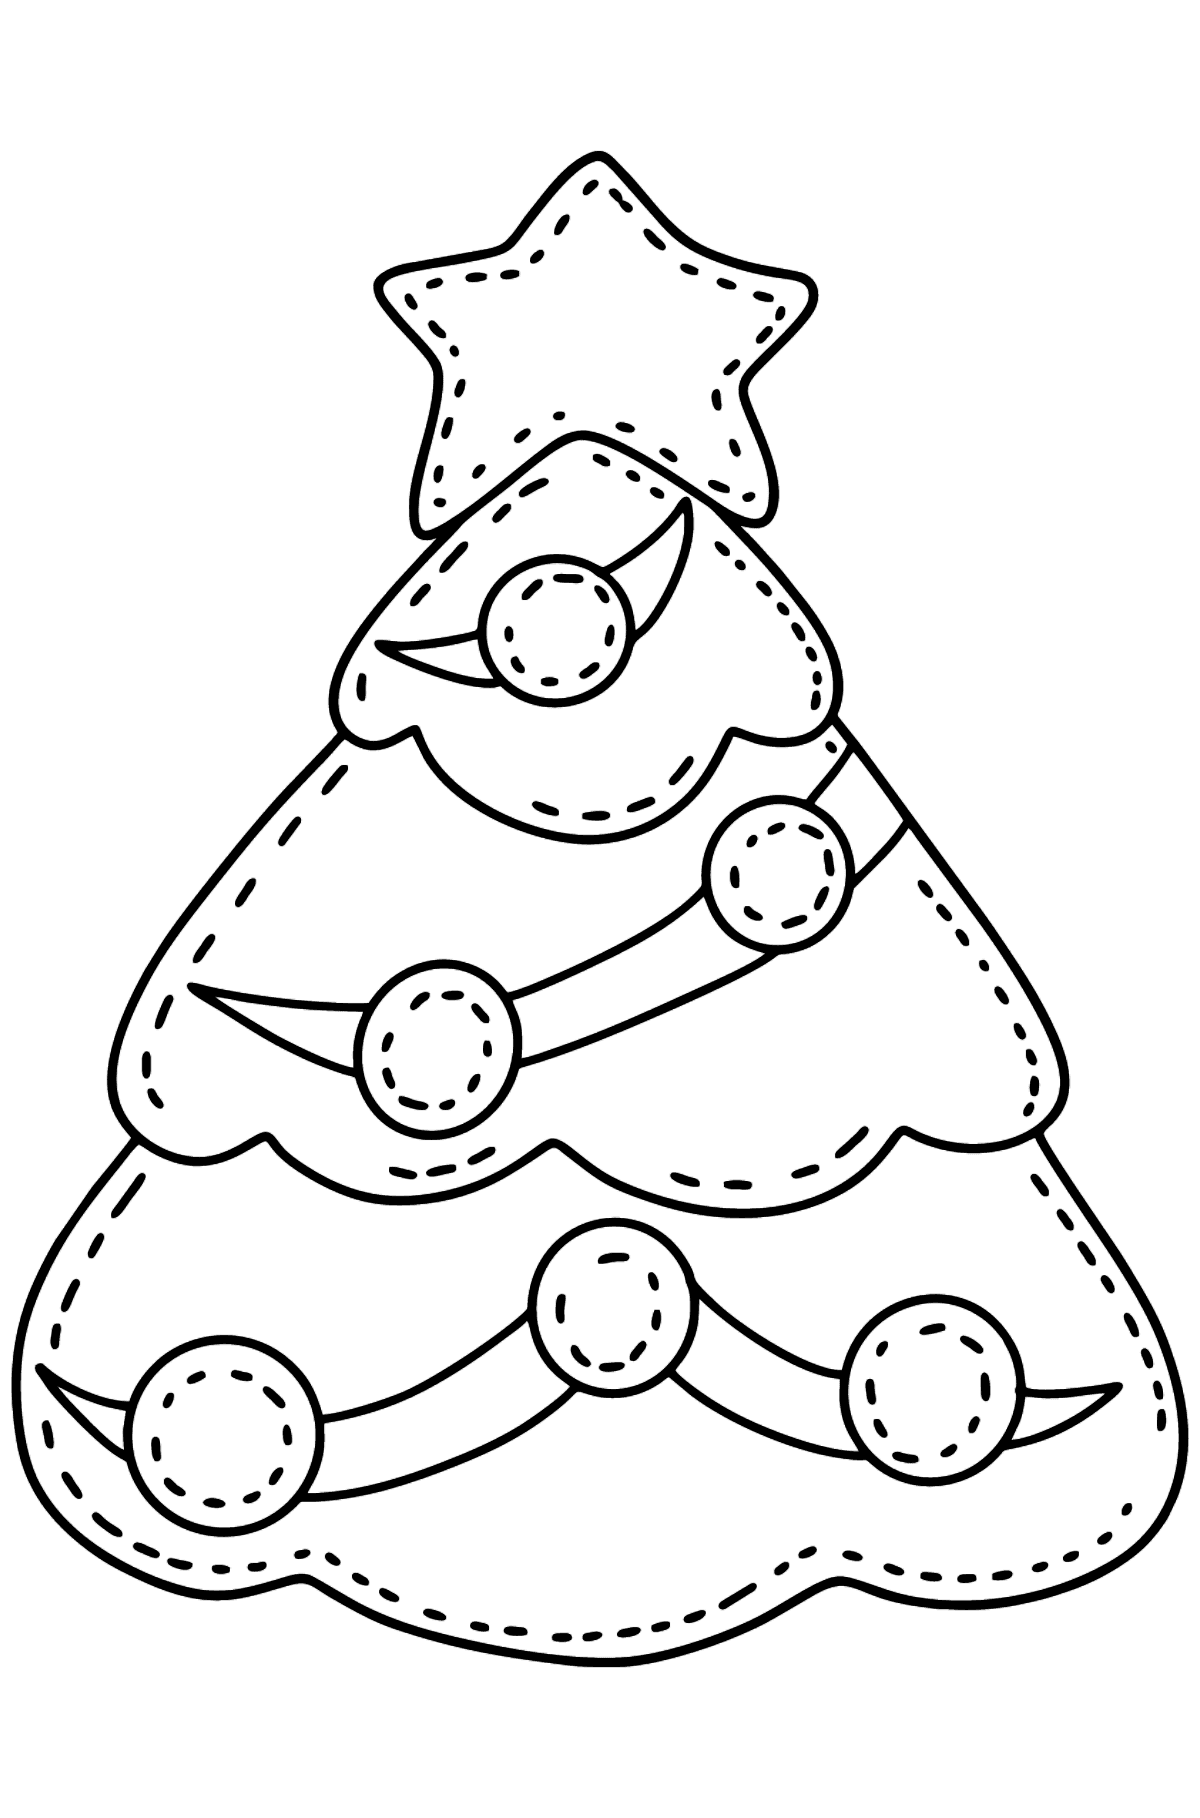 Felt Christmas Tree coloring page - Coloring Pages for Kids